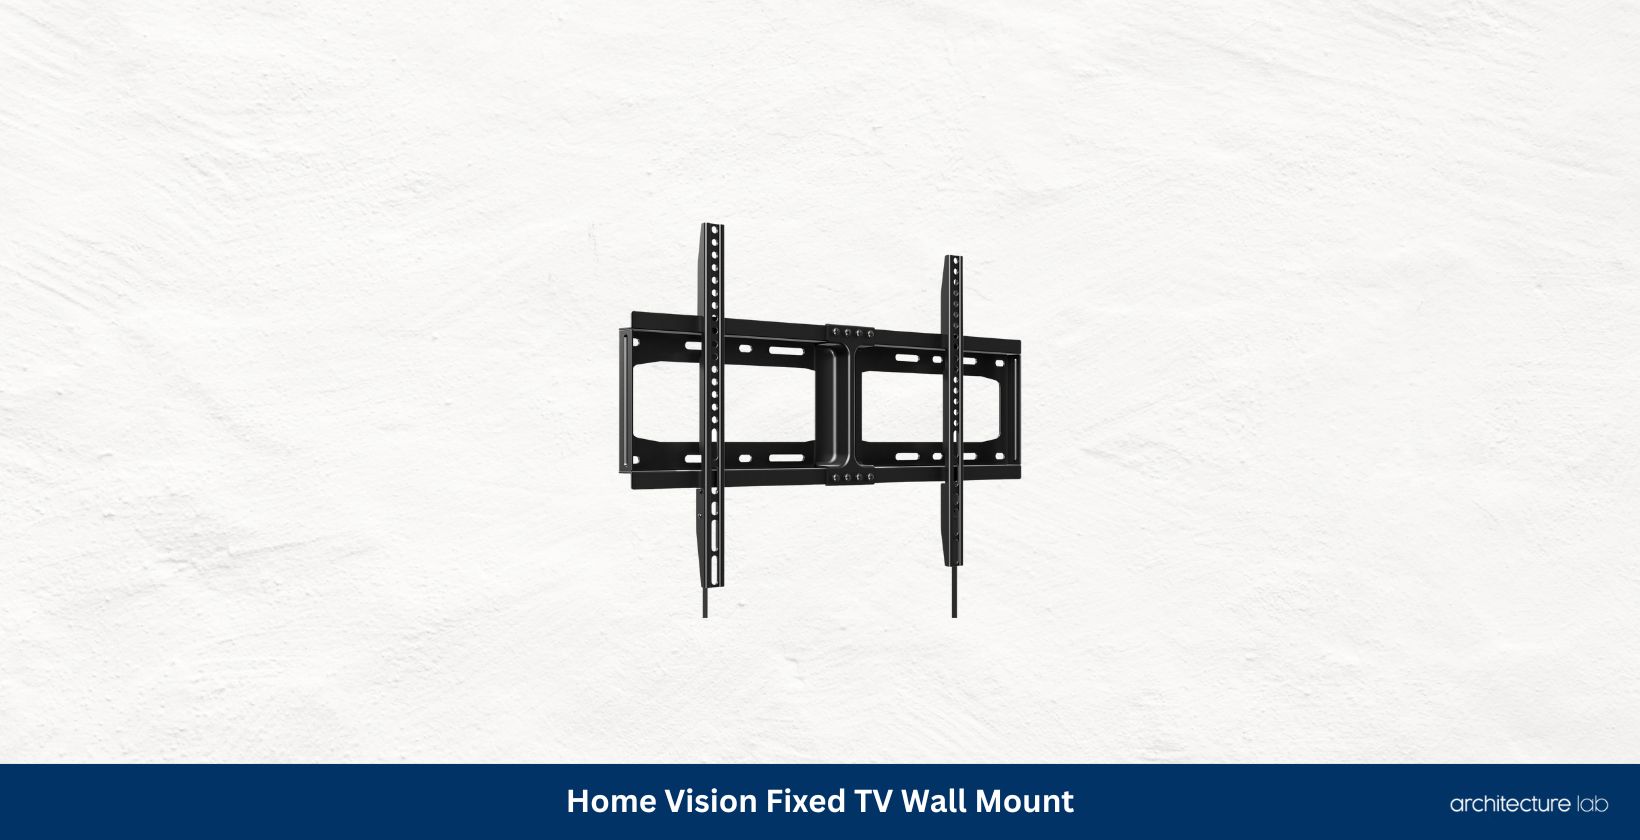 Home vision fixed tv wall mount